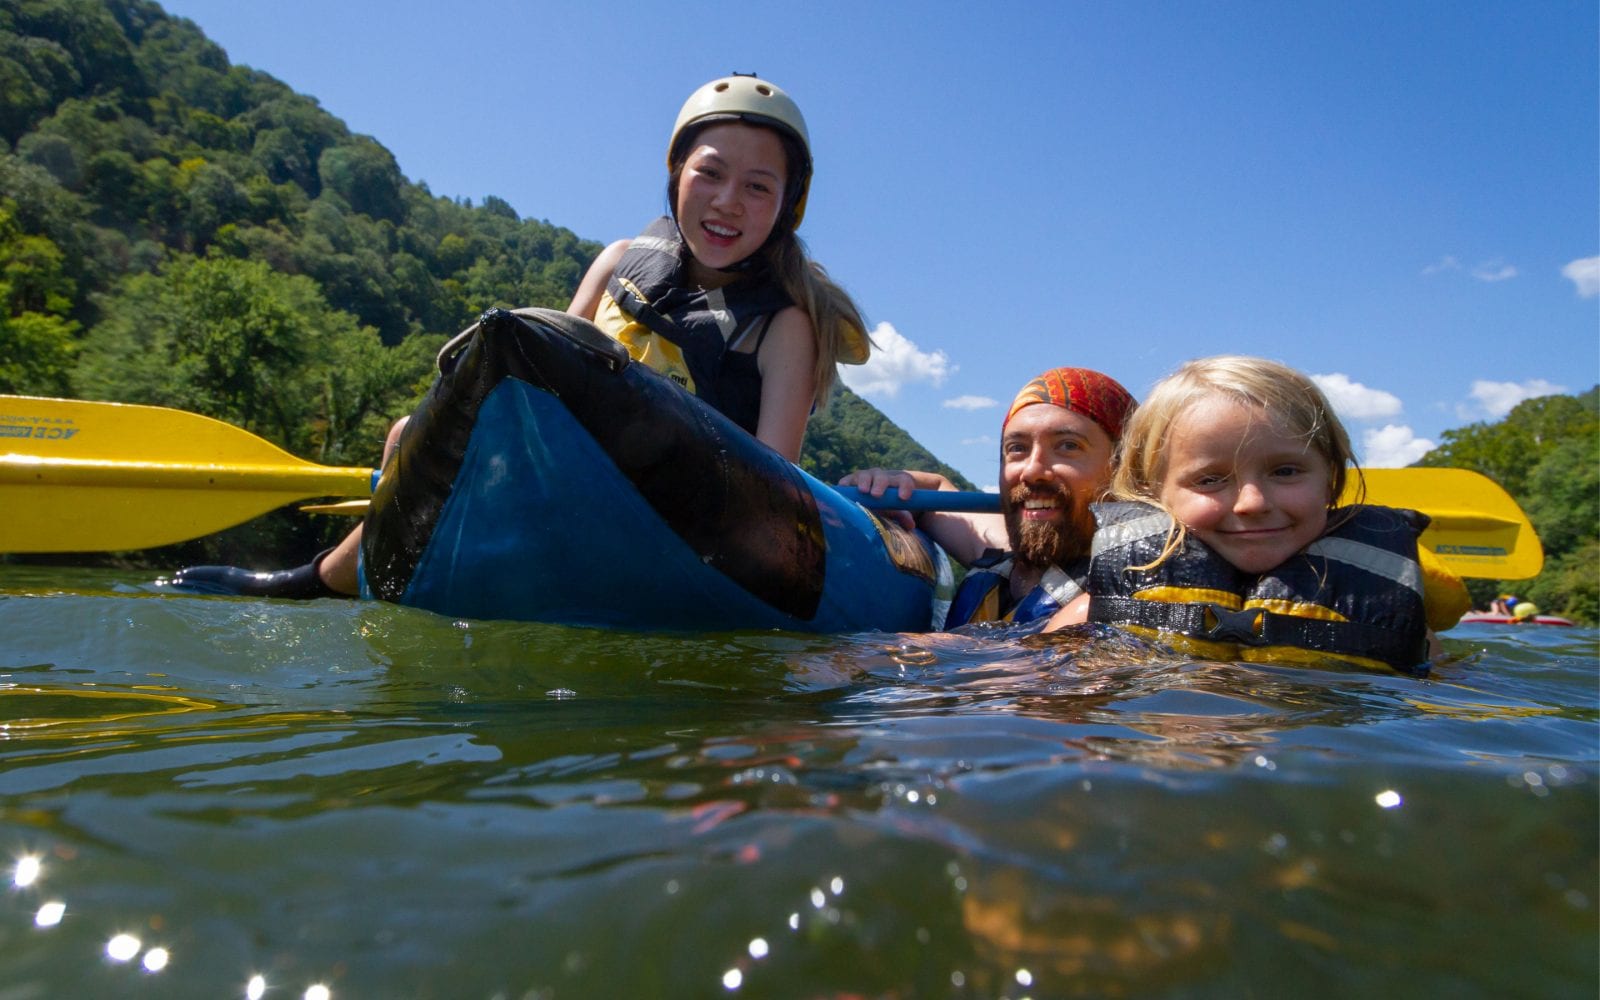 A family enjoys white water rafting west virginia style on the upper new river gorge.